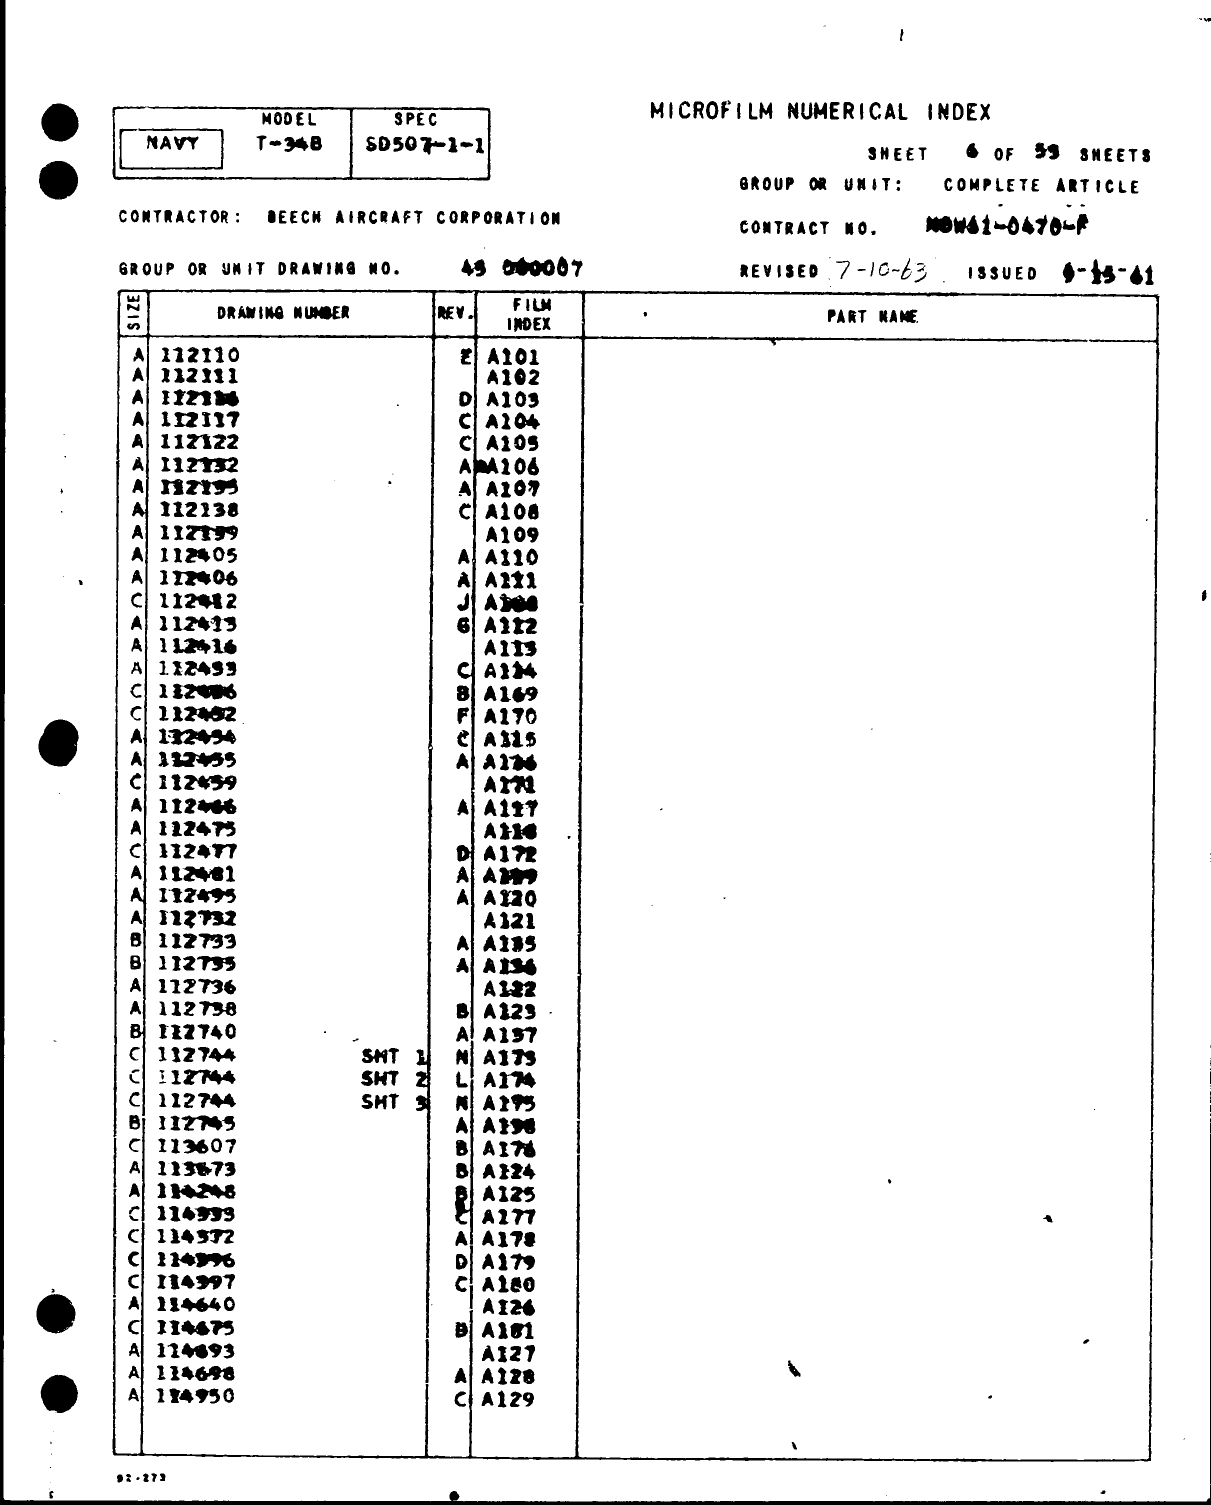 Sample page 6 from AirCorps Library document: Microfilm Numerical Index for T-34B